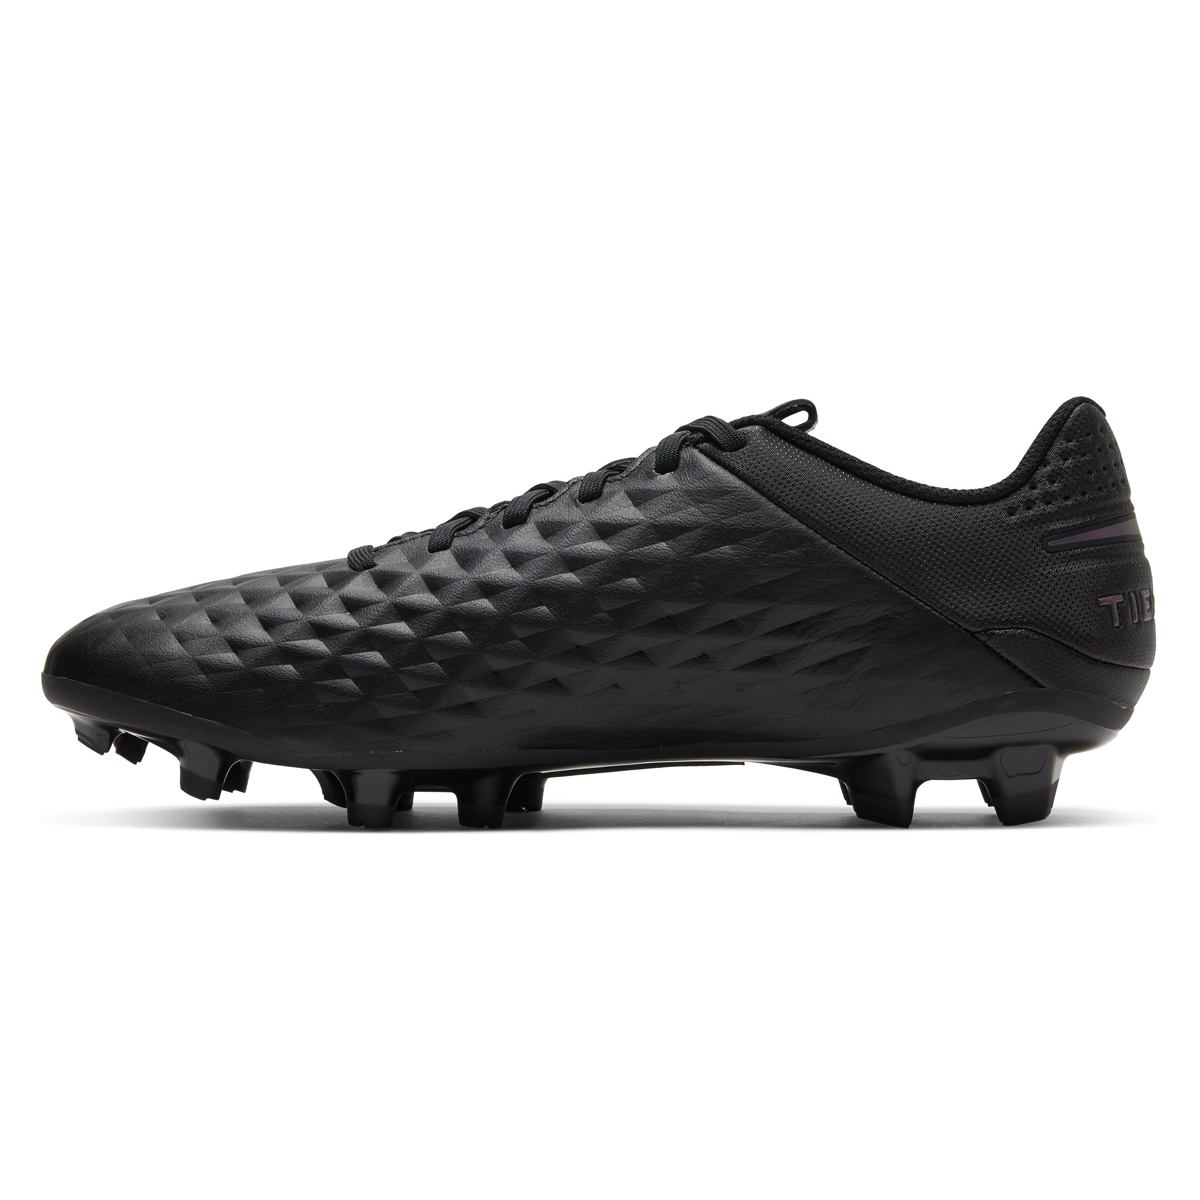 Botines Nike Legend 8 Academy Fg Mg,  image number null